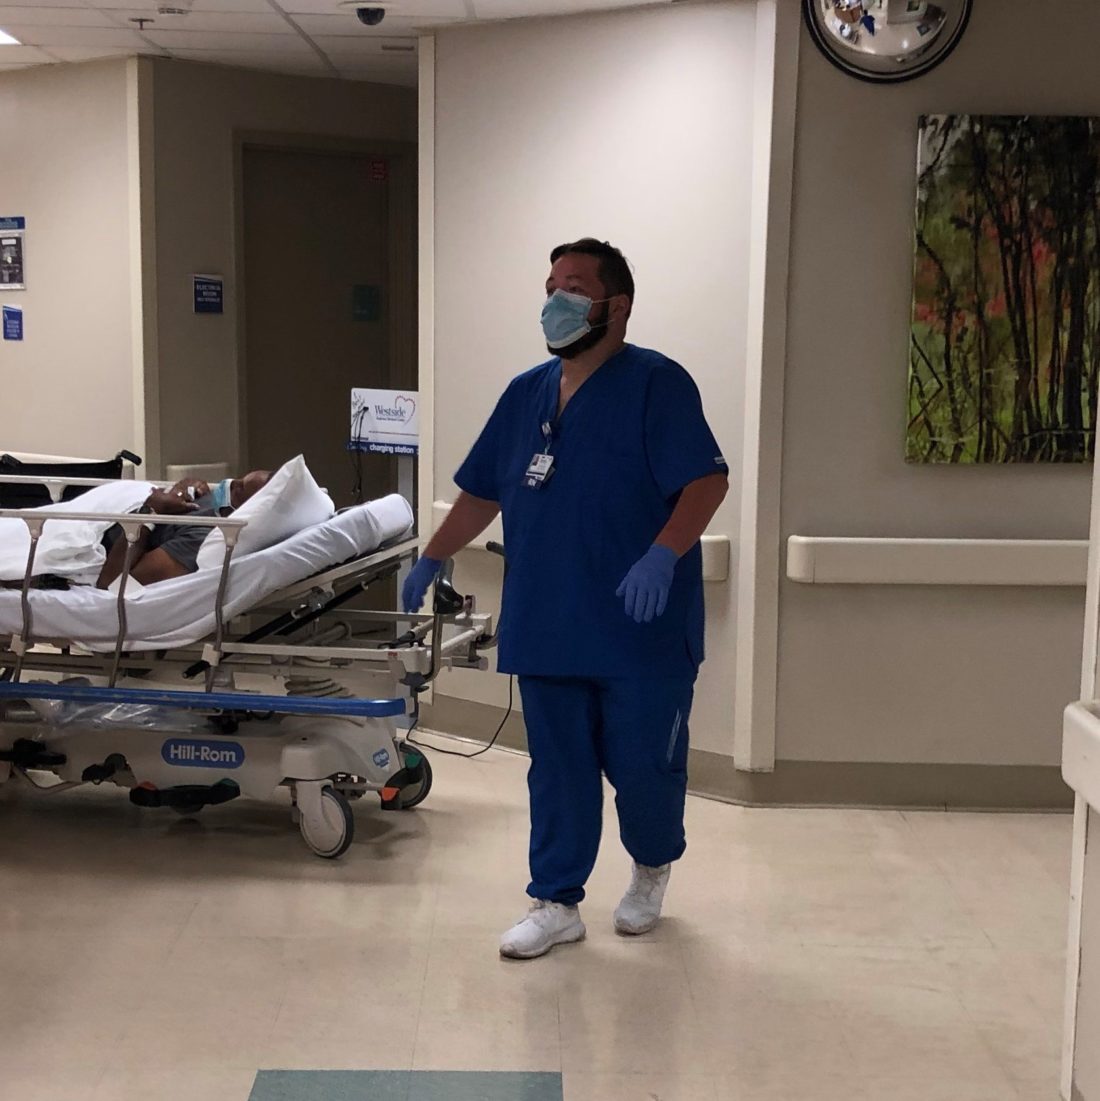 Patrick Pabone in scrubs, a protective face mask and gloves walking through a hospital hallway